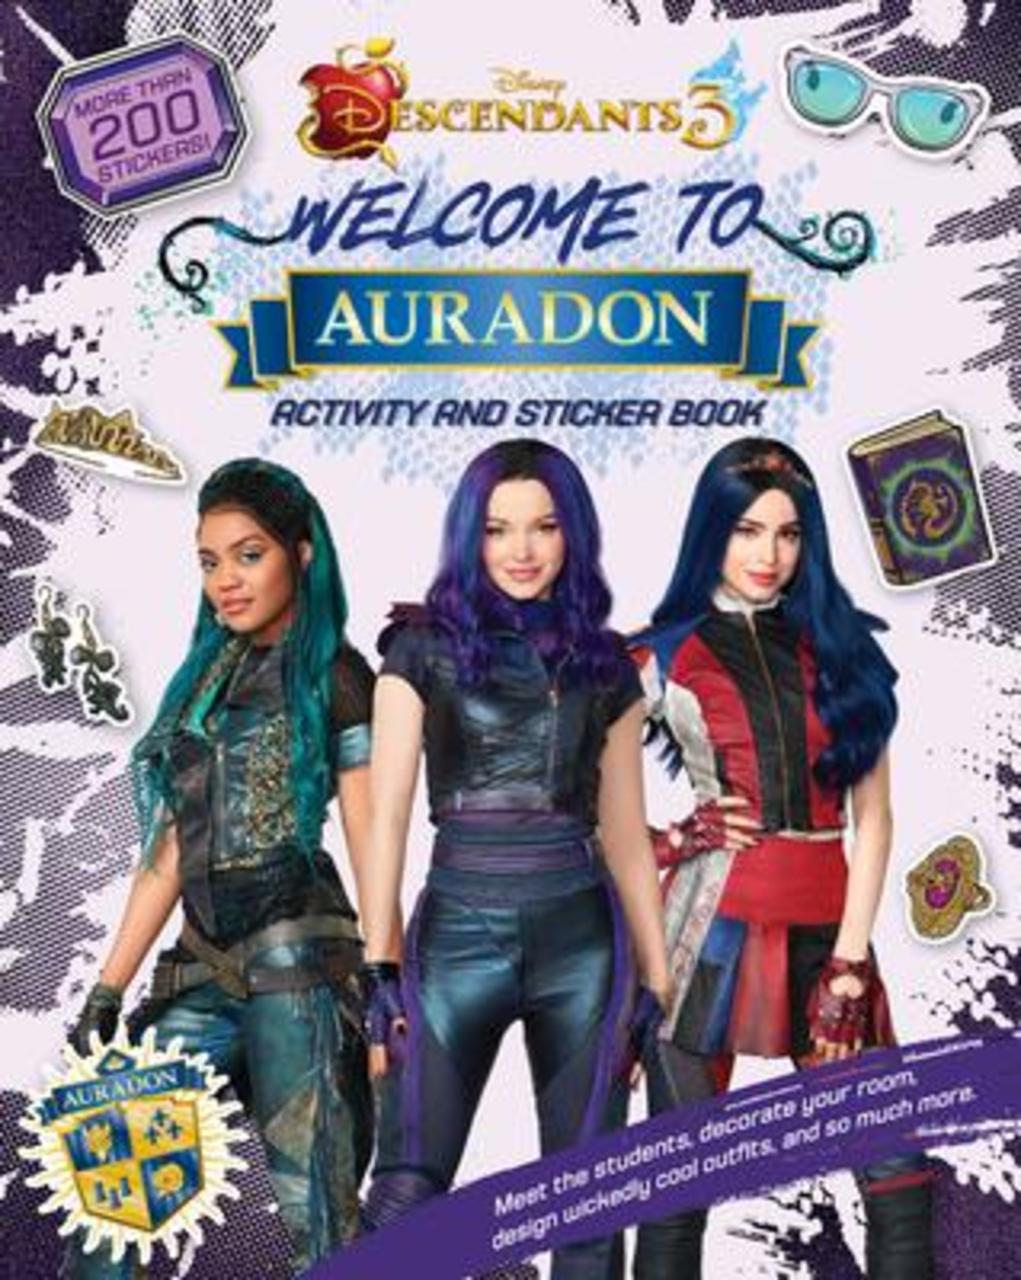 Sách - Welcome to Auradon: A Descendants 3 Sticker and Activity Book by Disney Book Group (paperback)